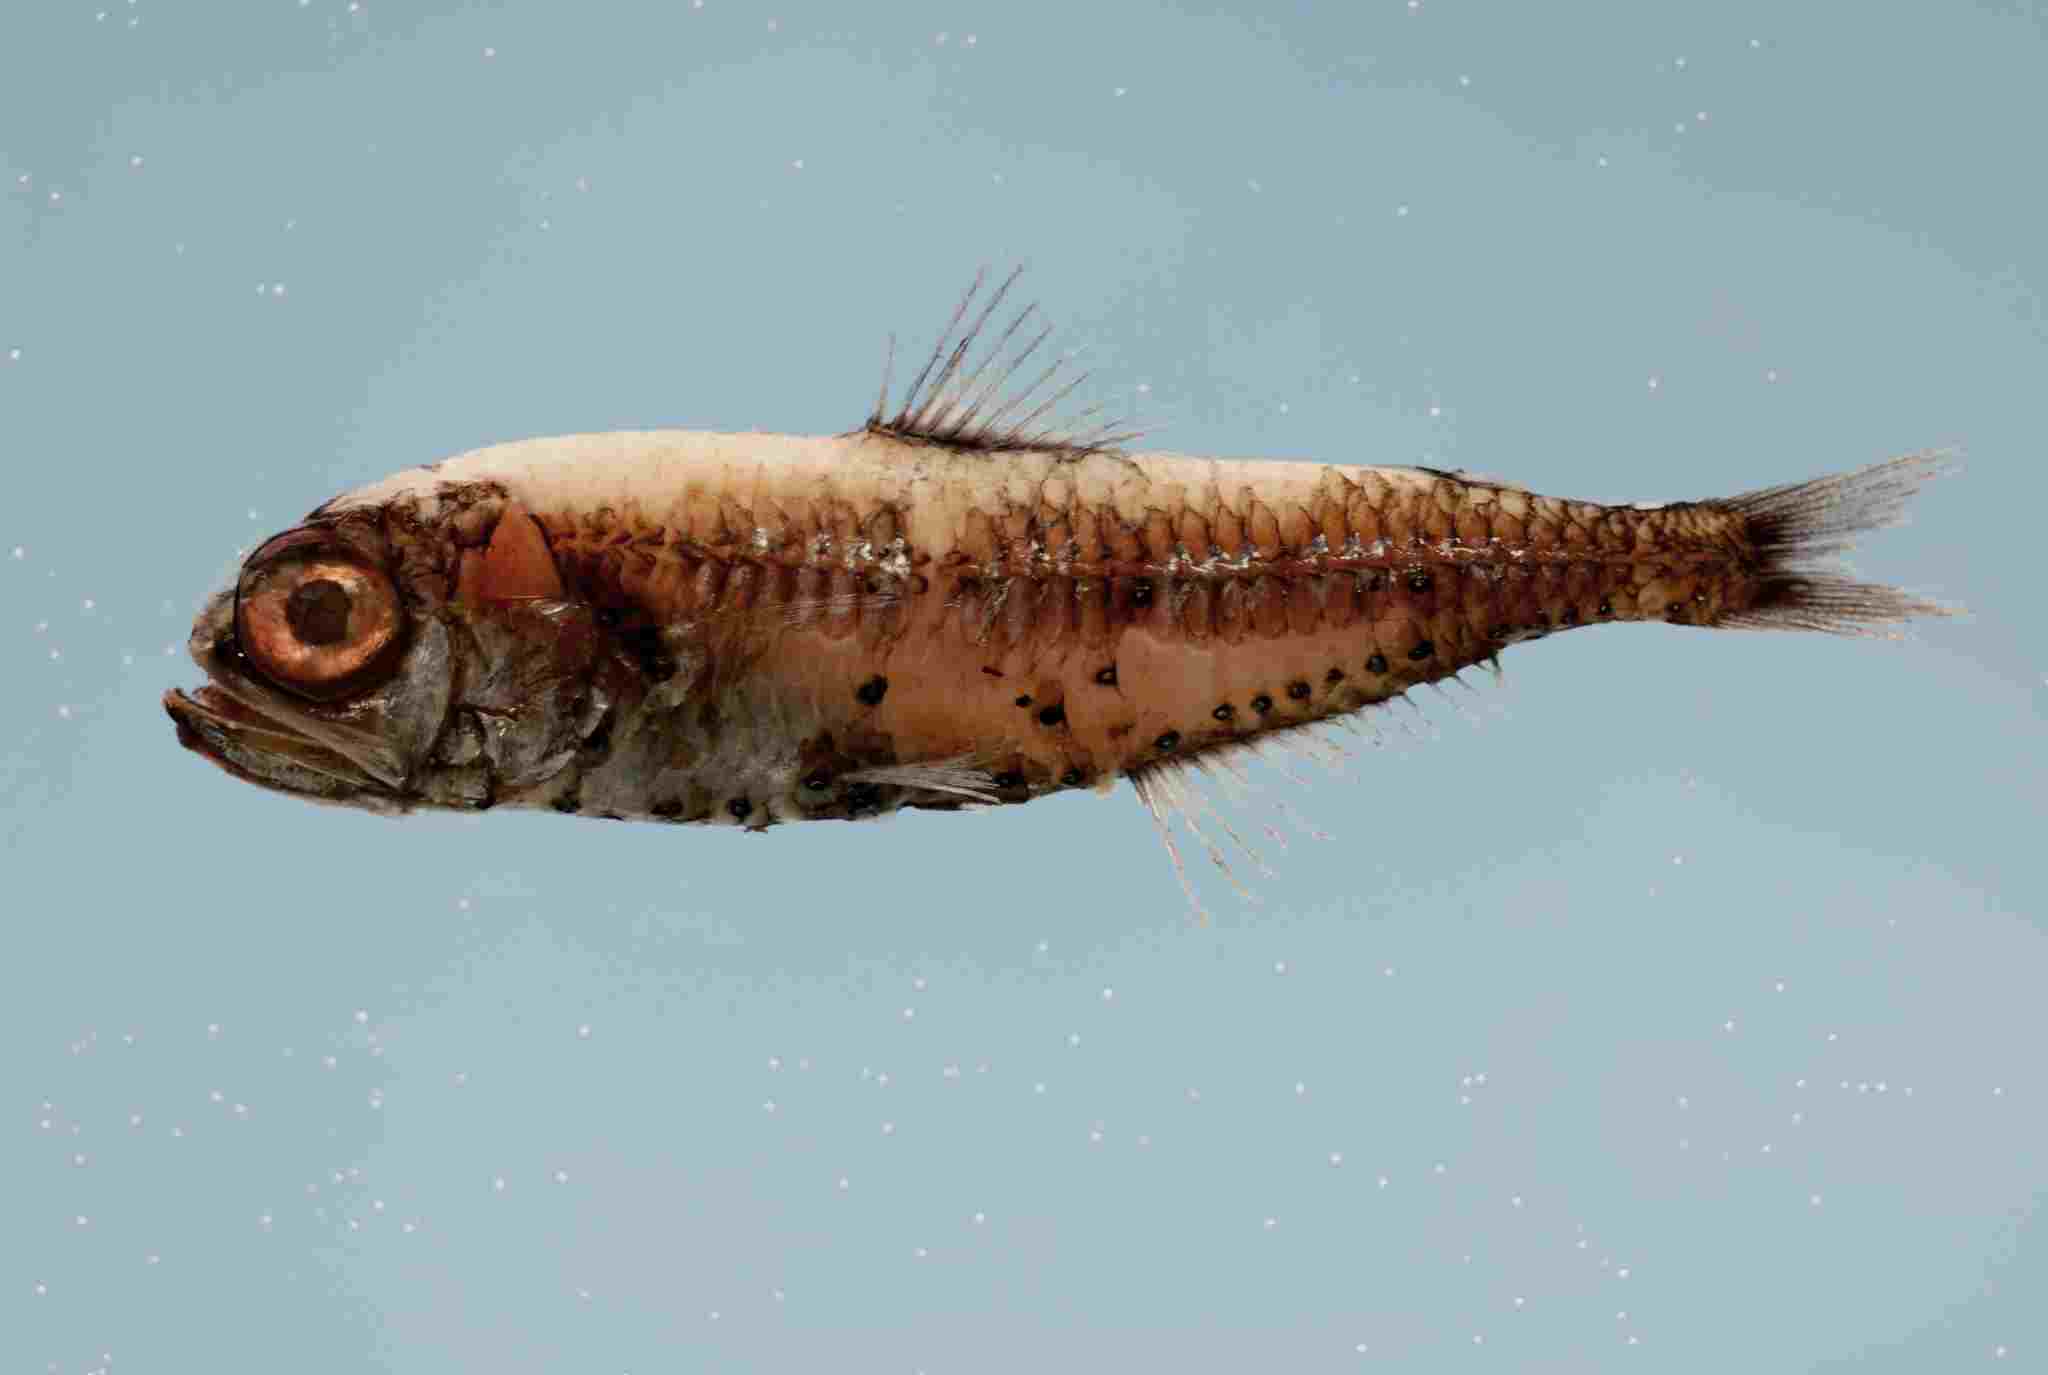 Decomposers in the Ocean: Organisms like the Lanternfish Exhibit Scavenging Mode of Feeding (Credit: NOAA Photo Library 2007, Uploaded Online 2010 .CC BY 2.0.)